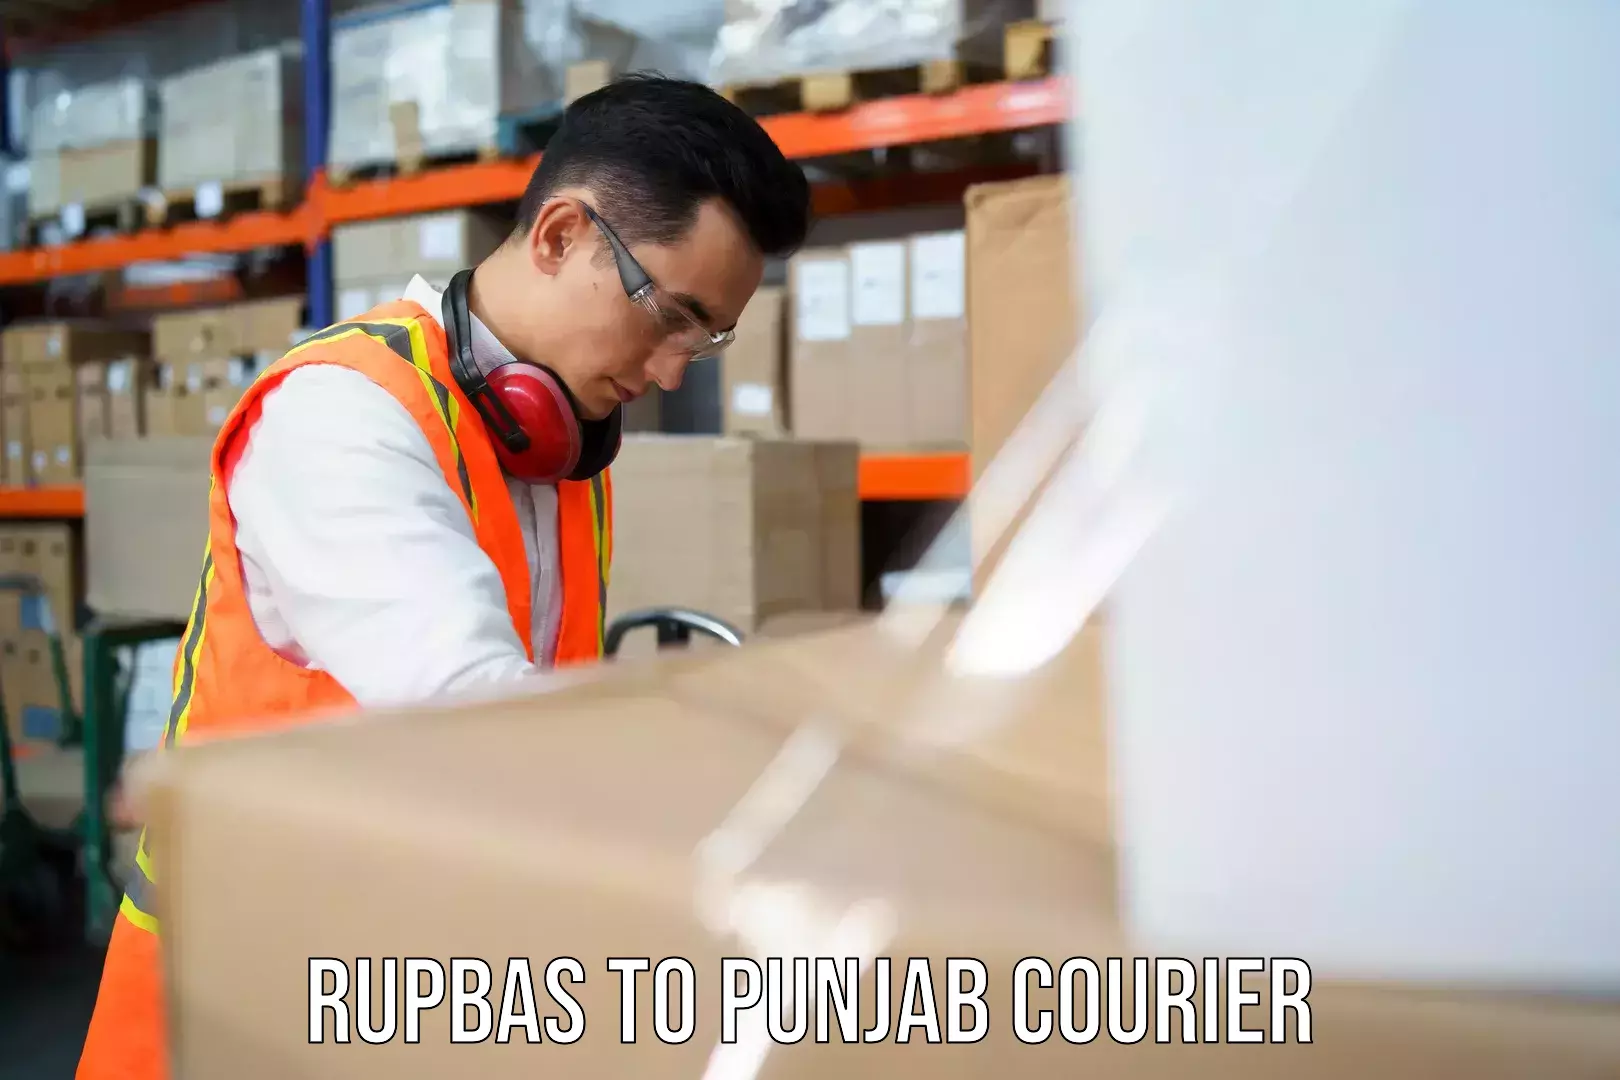 Track and trace shipping Rupbas to Punjab